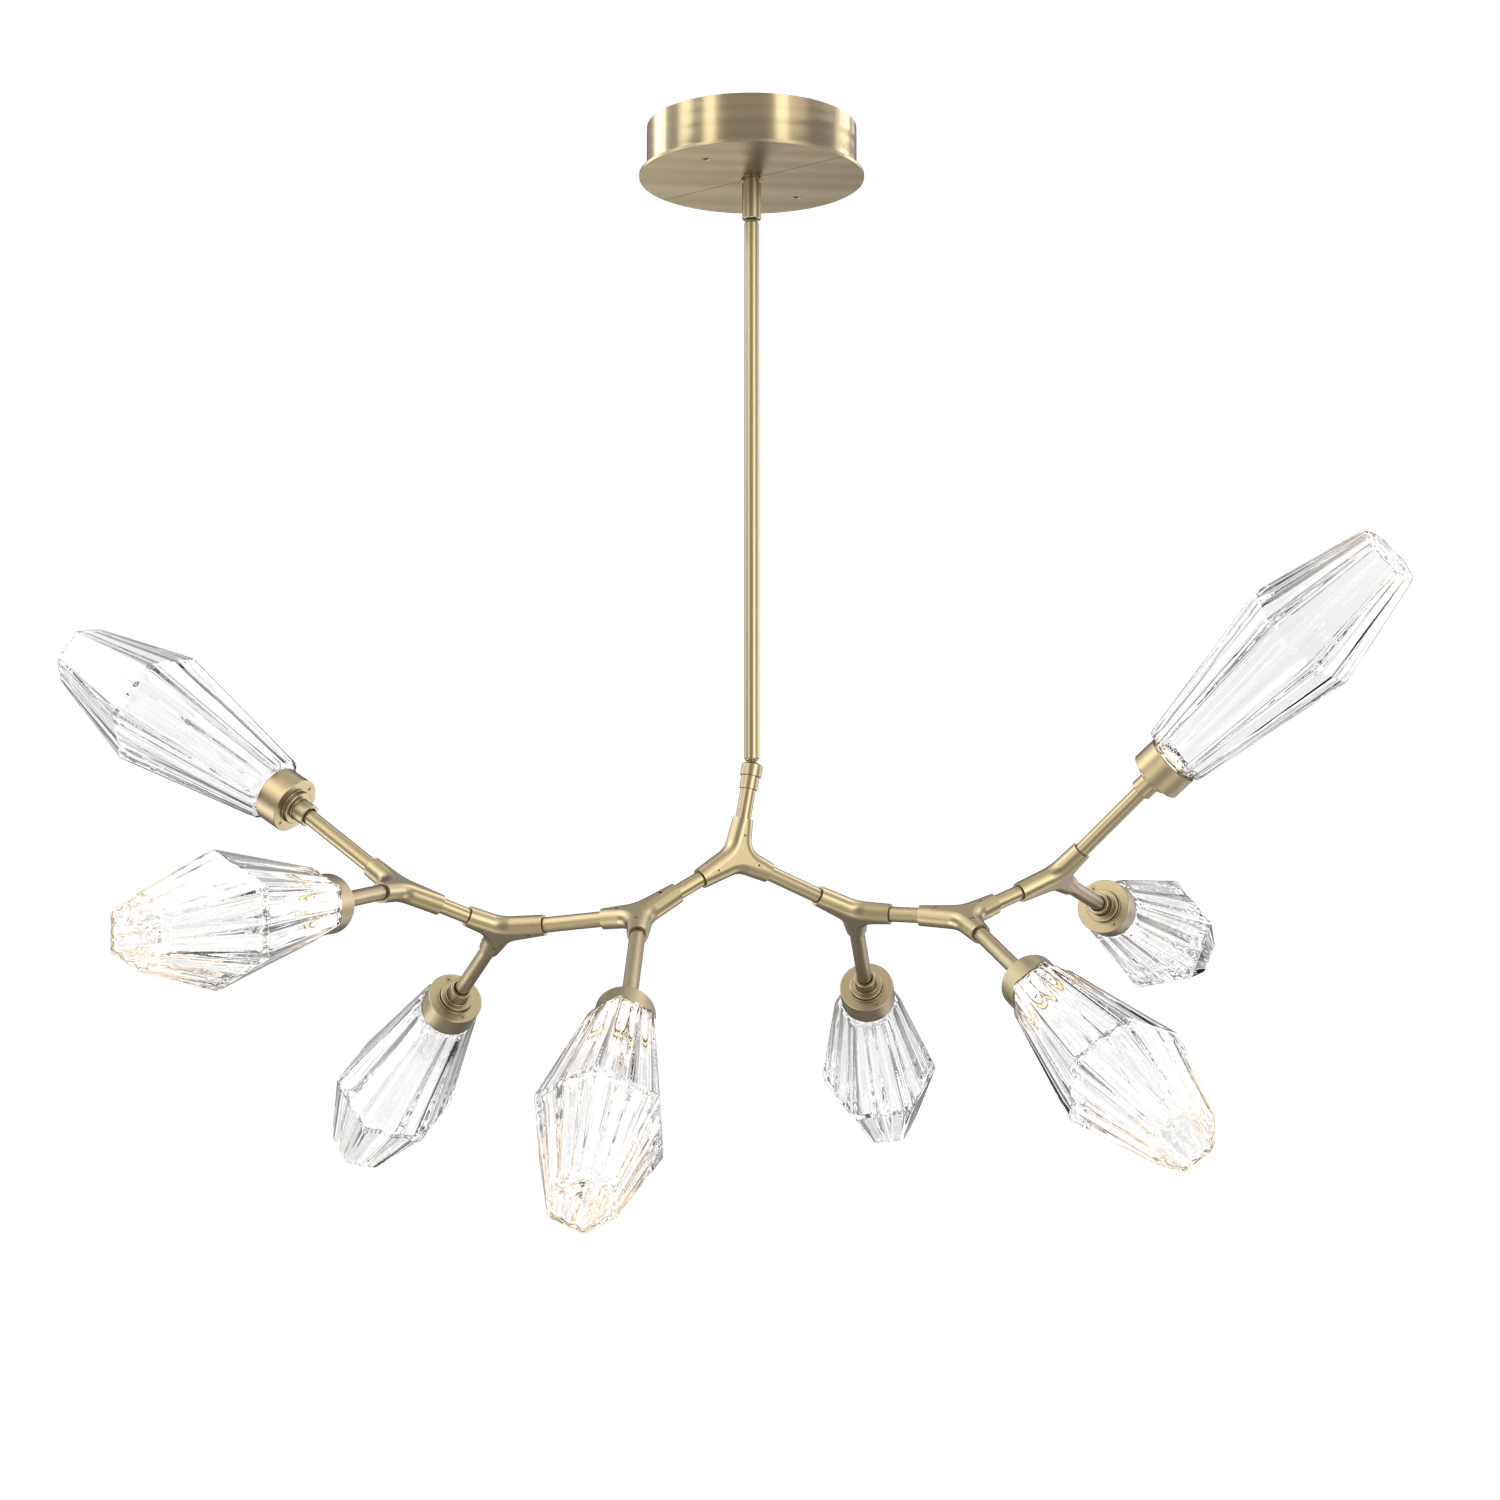 PLB0049-BB-HB-RC-Hammerton-Studio-Aalto-8-light-modern-branch-chandelier-with-heritage-brass-finish-and-optic-ribbed-clear-glass-shades-and-LED-lamping